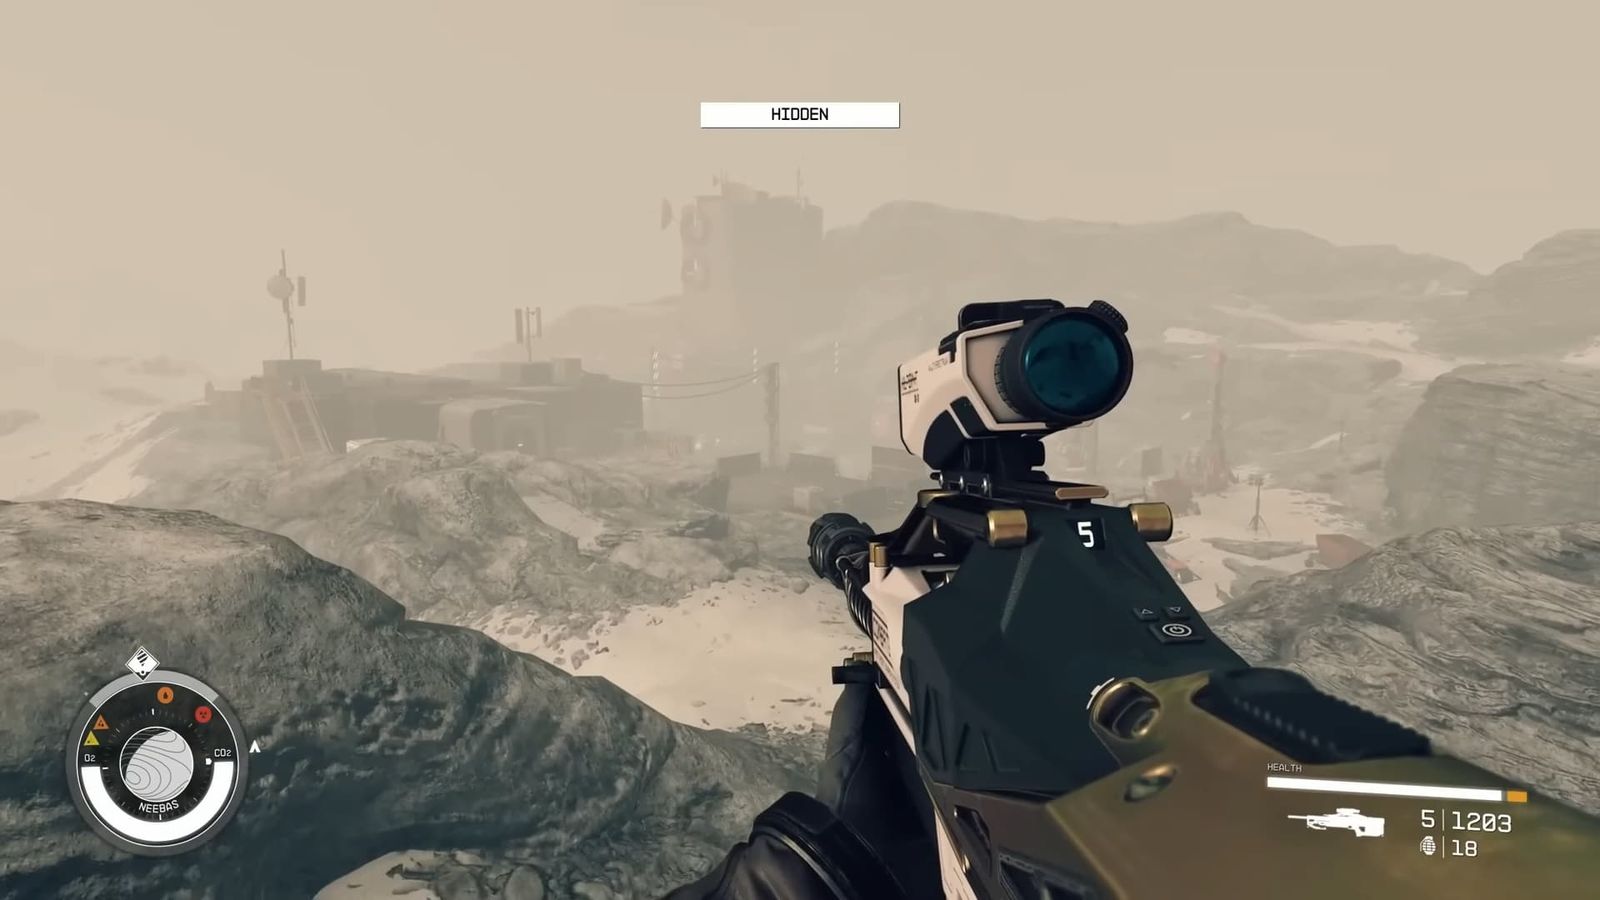 Player holds a sniper rifle hidden above a building